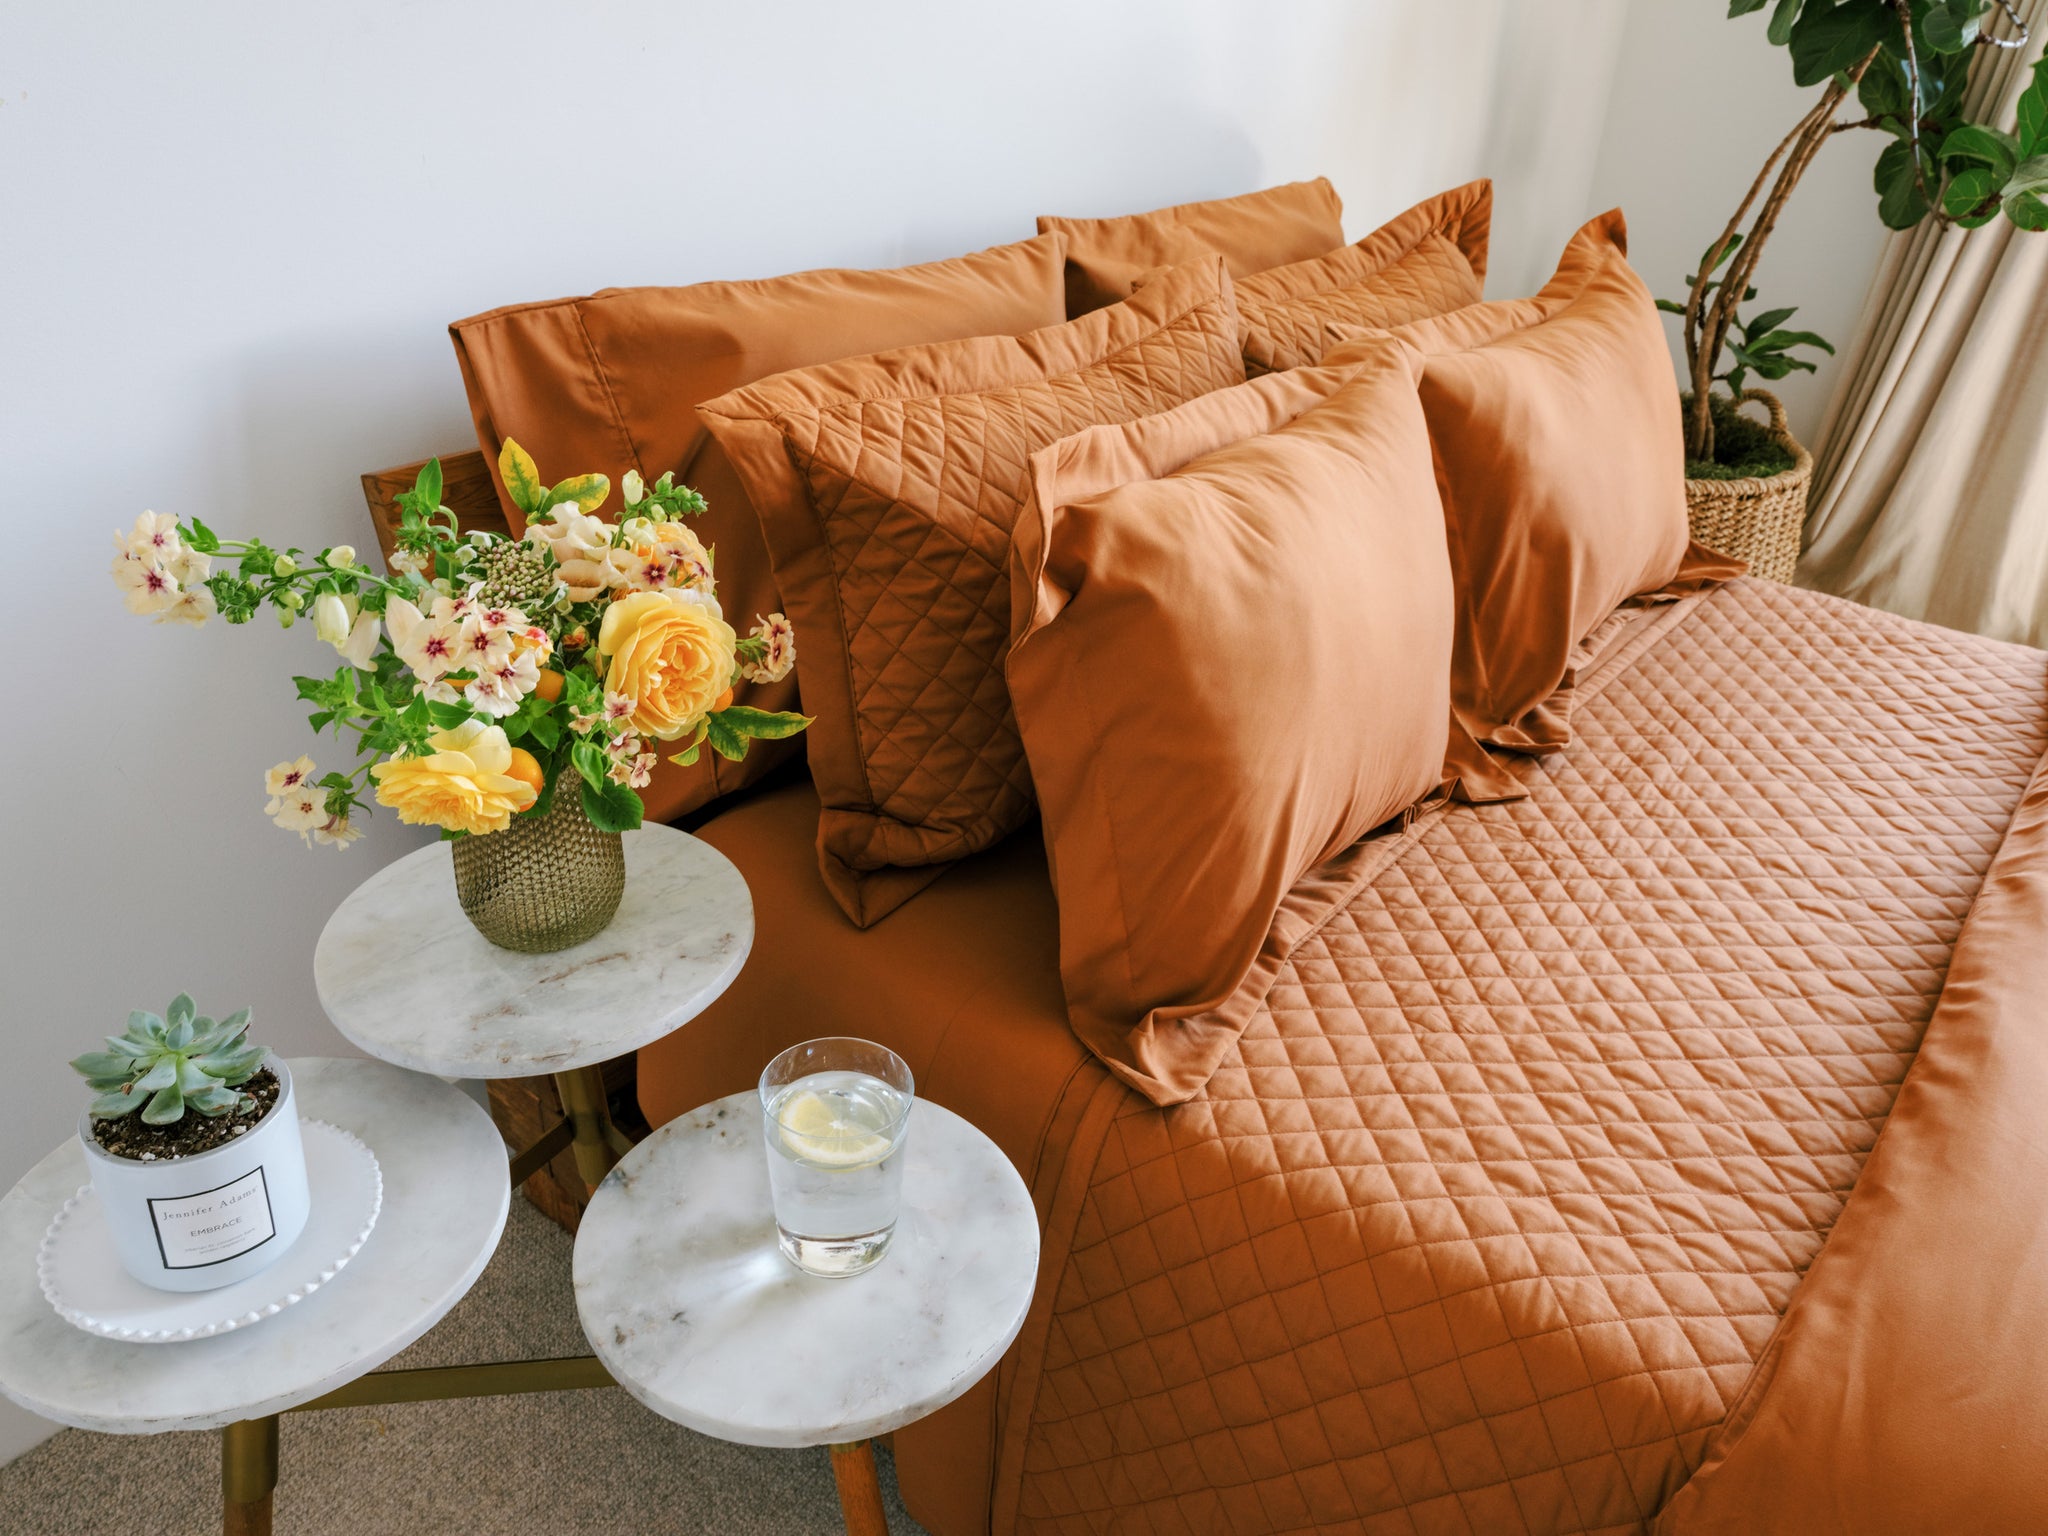 These warm, earthy colors are the epitome of fall coziness